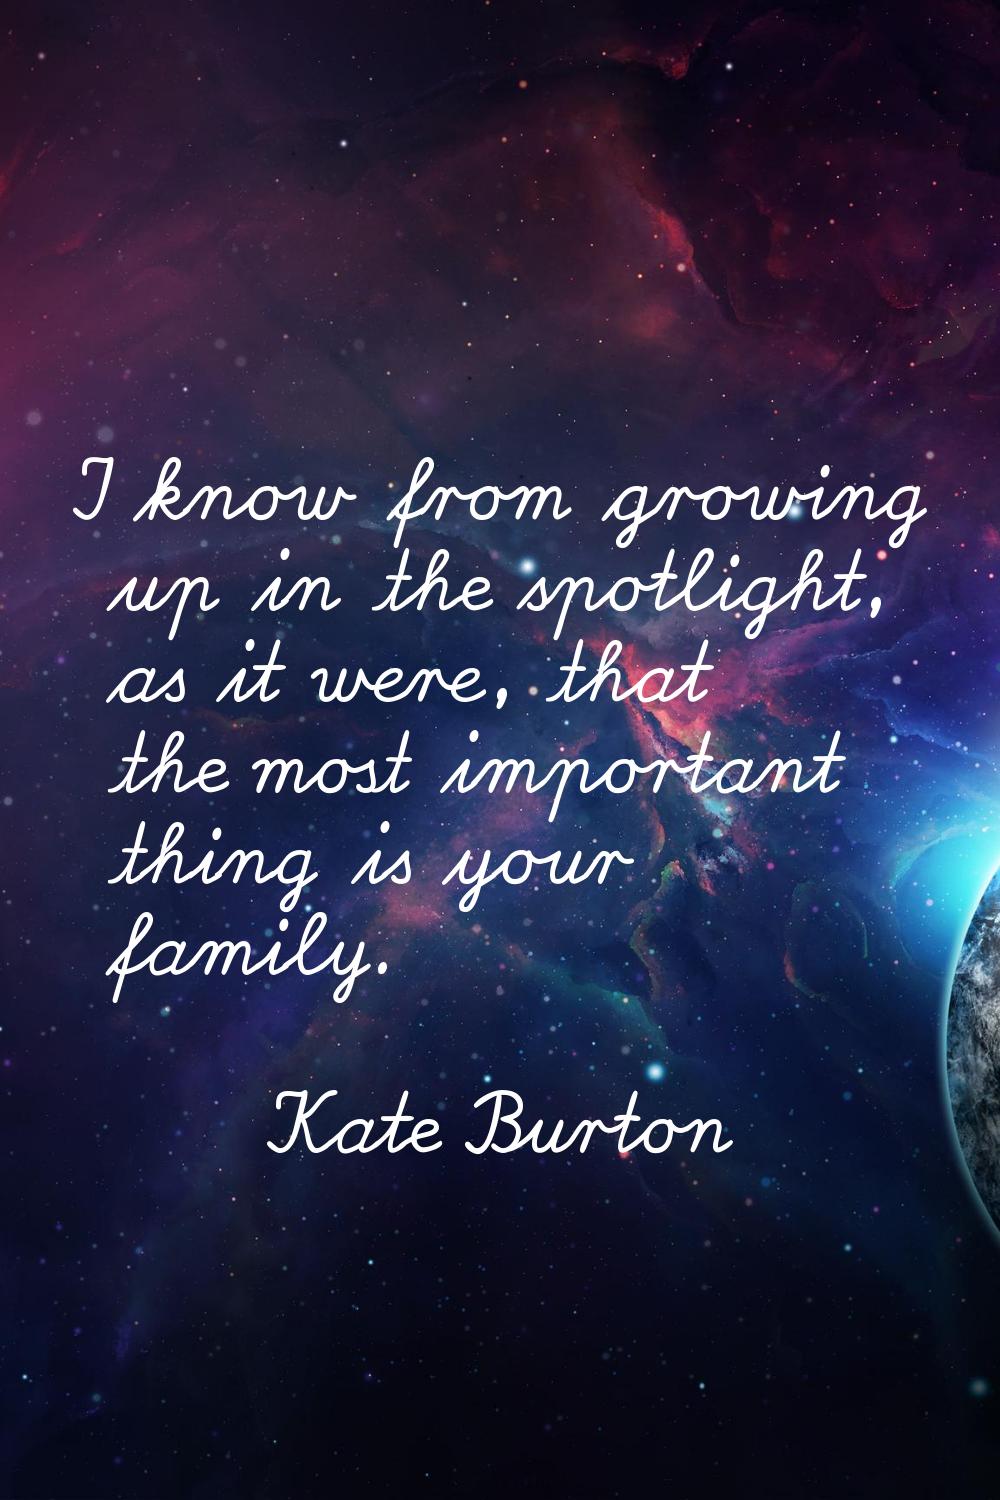 I know from growing up in the spotlight, as it were, that the most important thing is your family.